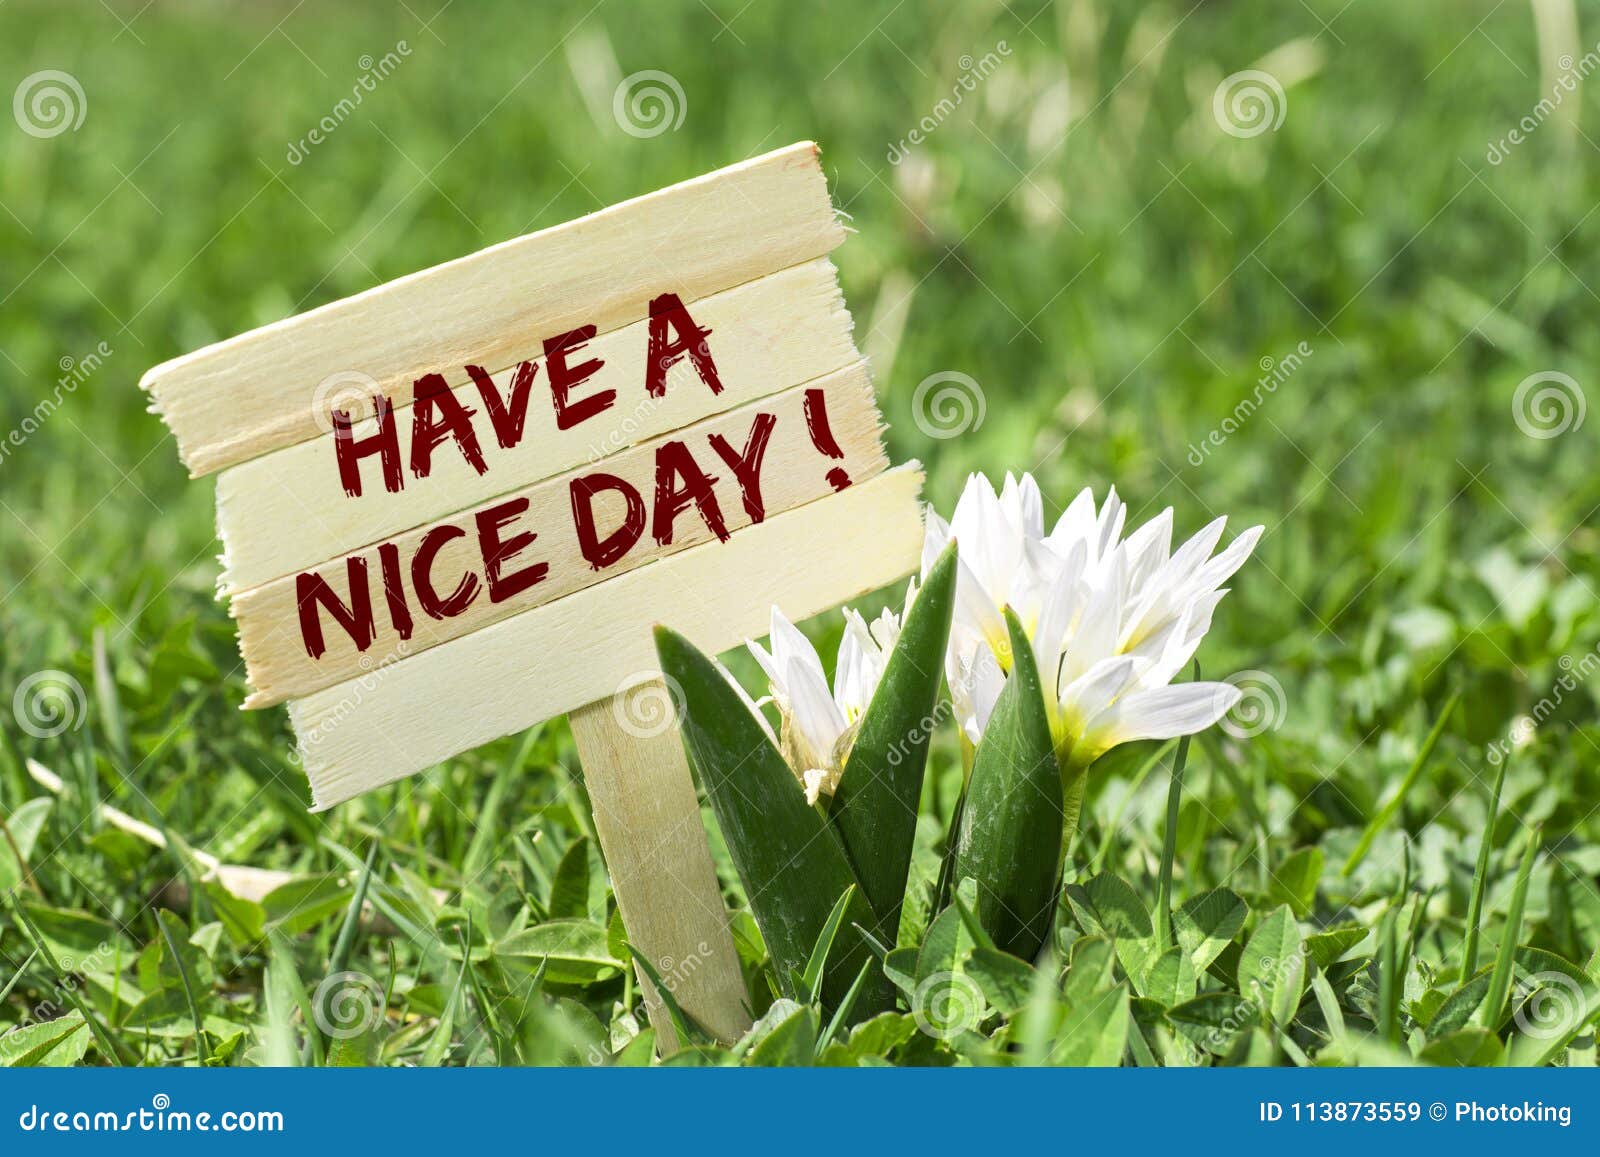 Have a nice day stock image. Image of reminder, post - 113873559